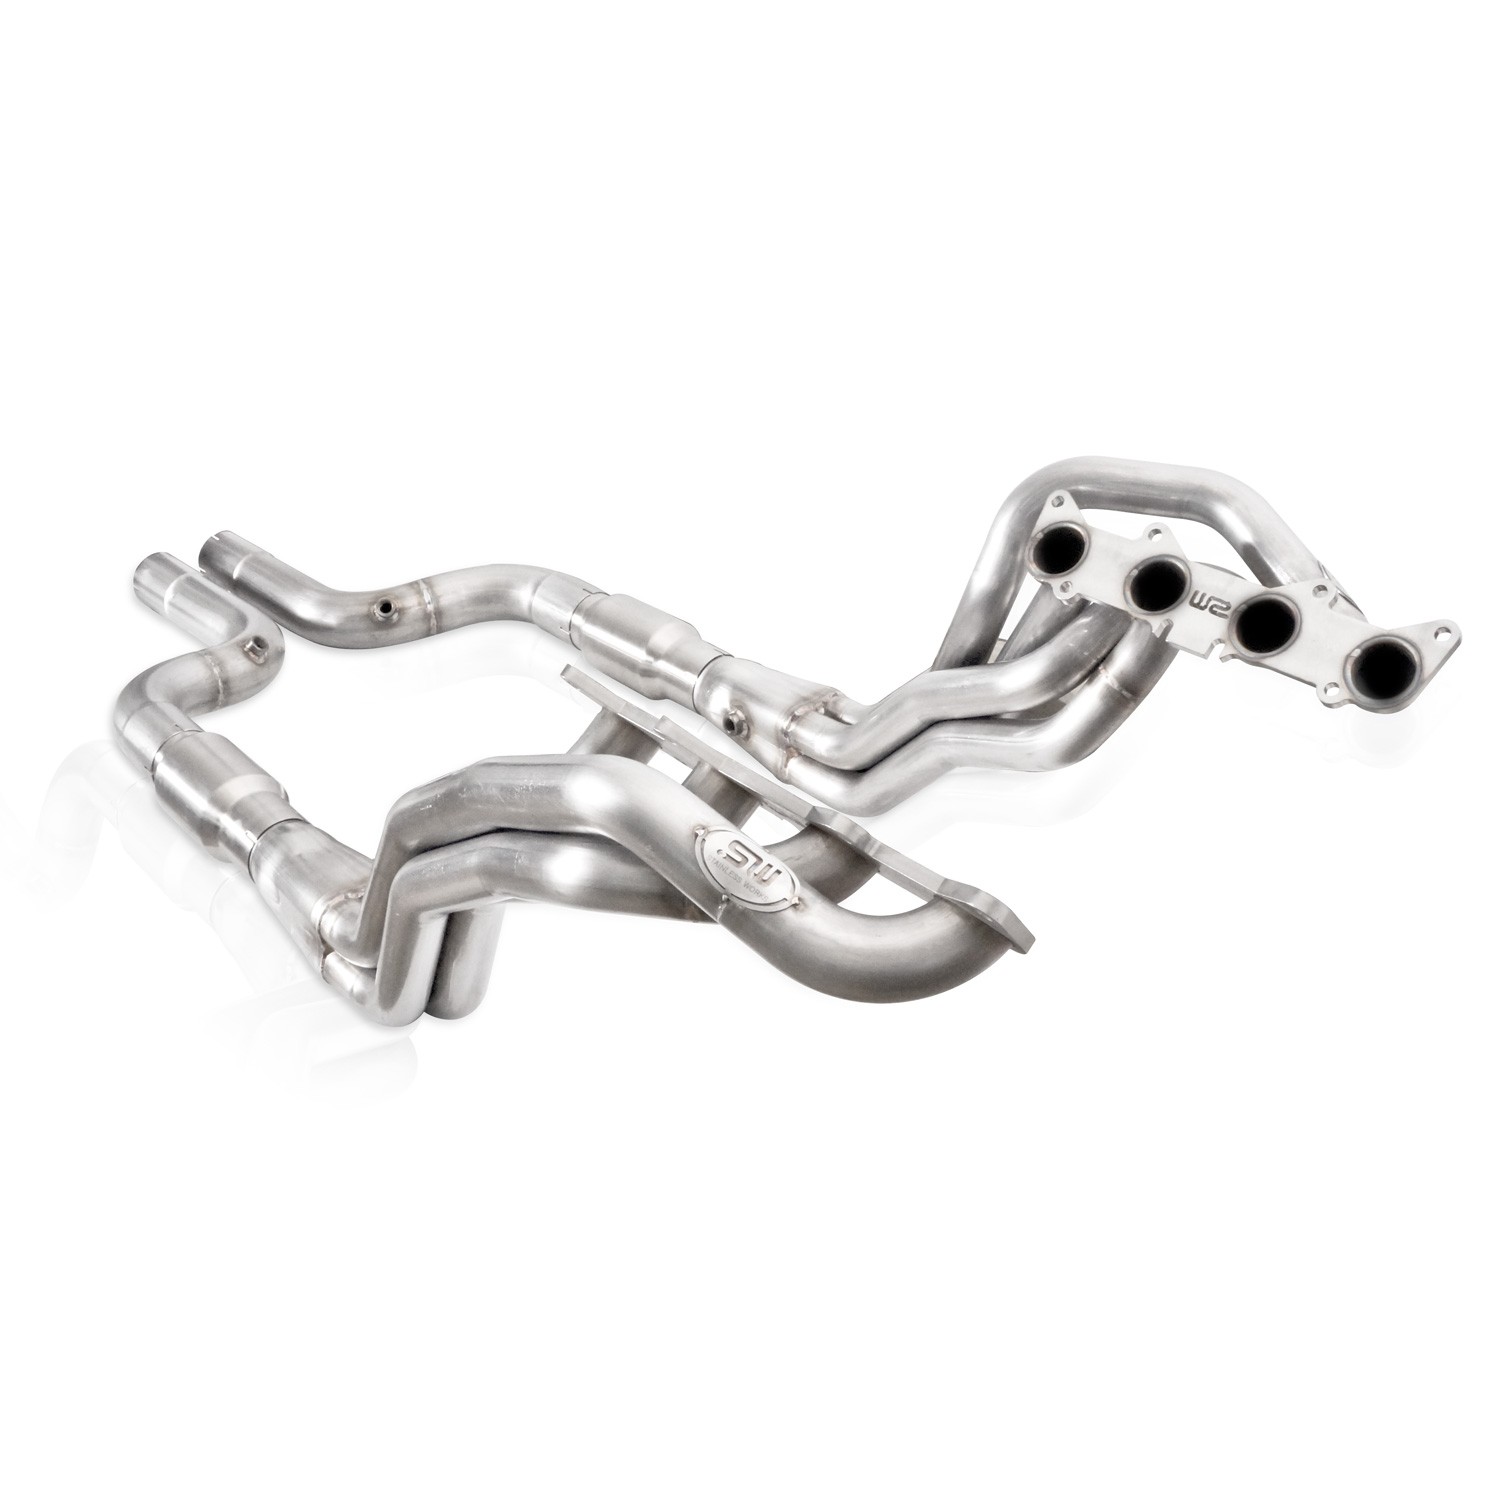 2015+ Ford Mustang GT 5.0L V8 Stainless Works 1 7/8" Long Tube Headers w/Cats - Aftermarket Connection